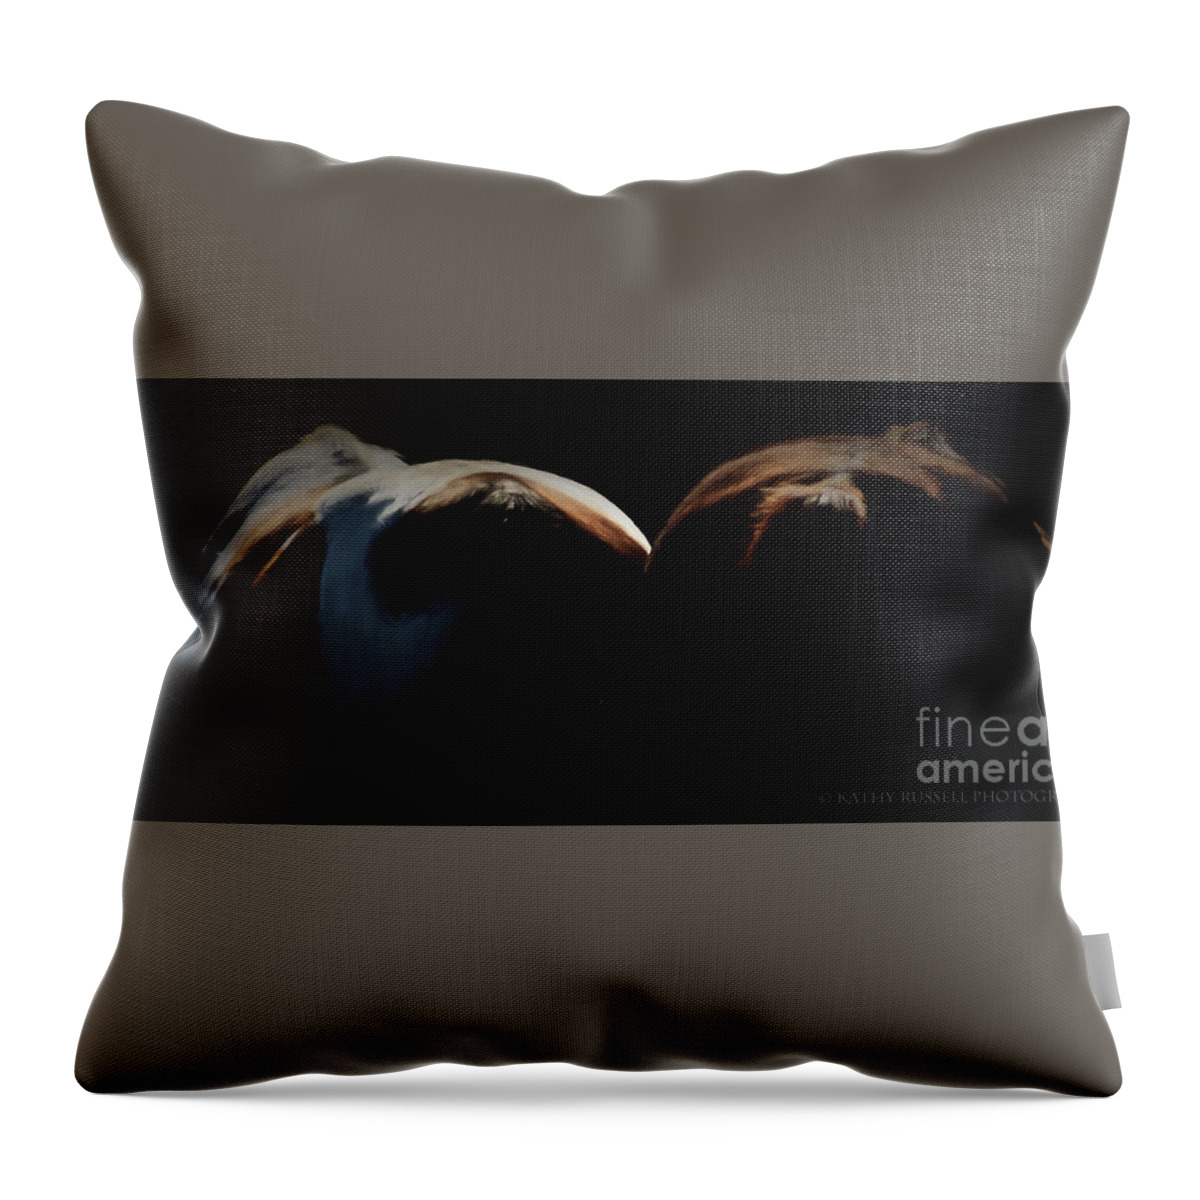  Throw Pillow featuring the photograph Backsides by Kathy Russell